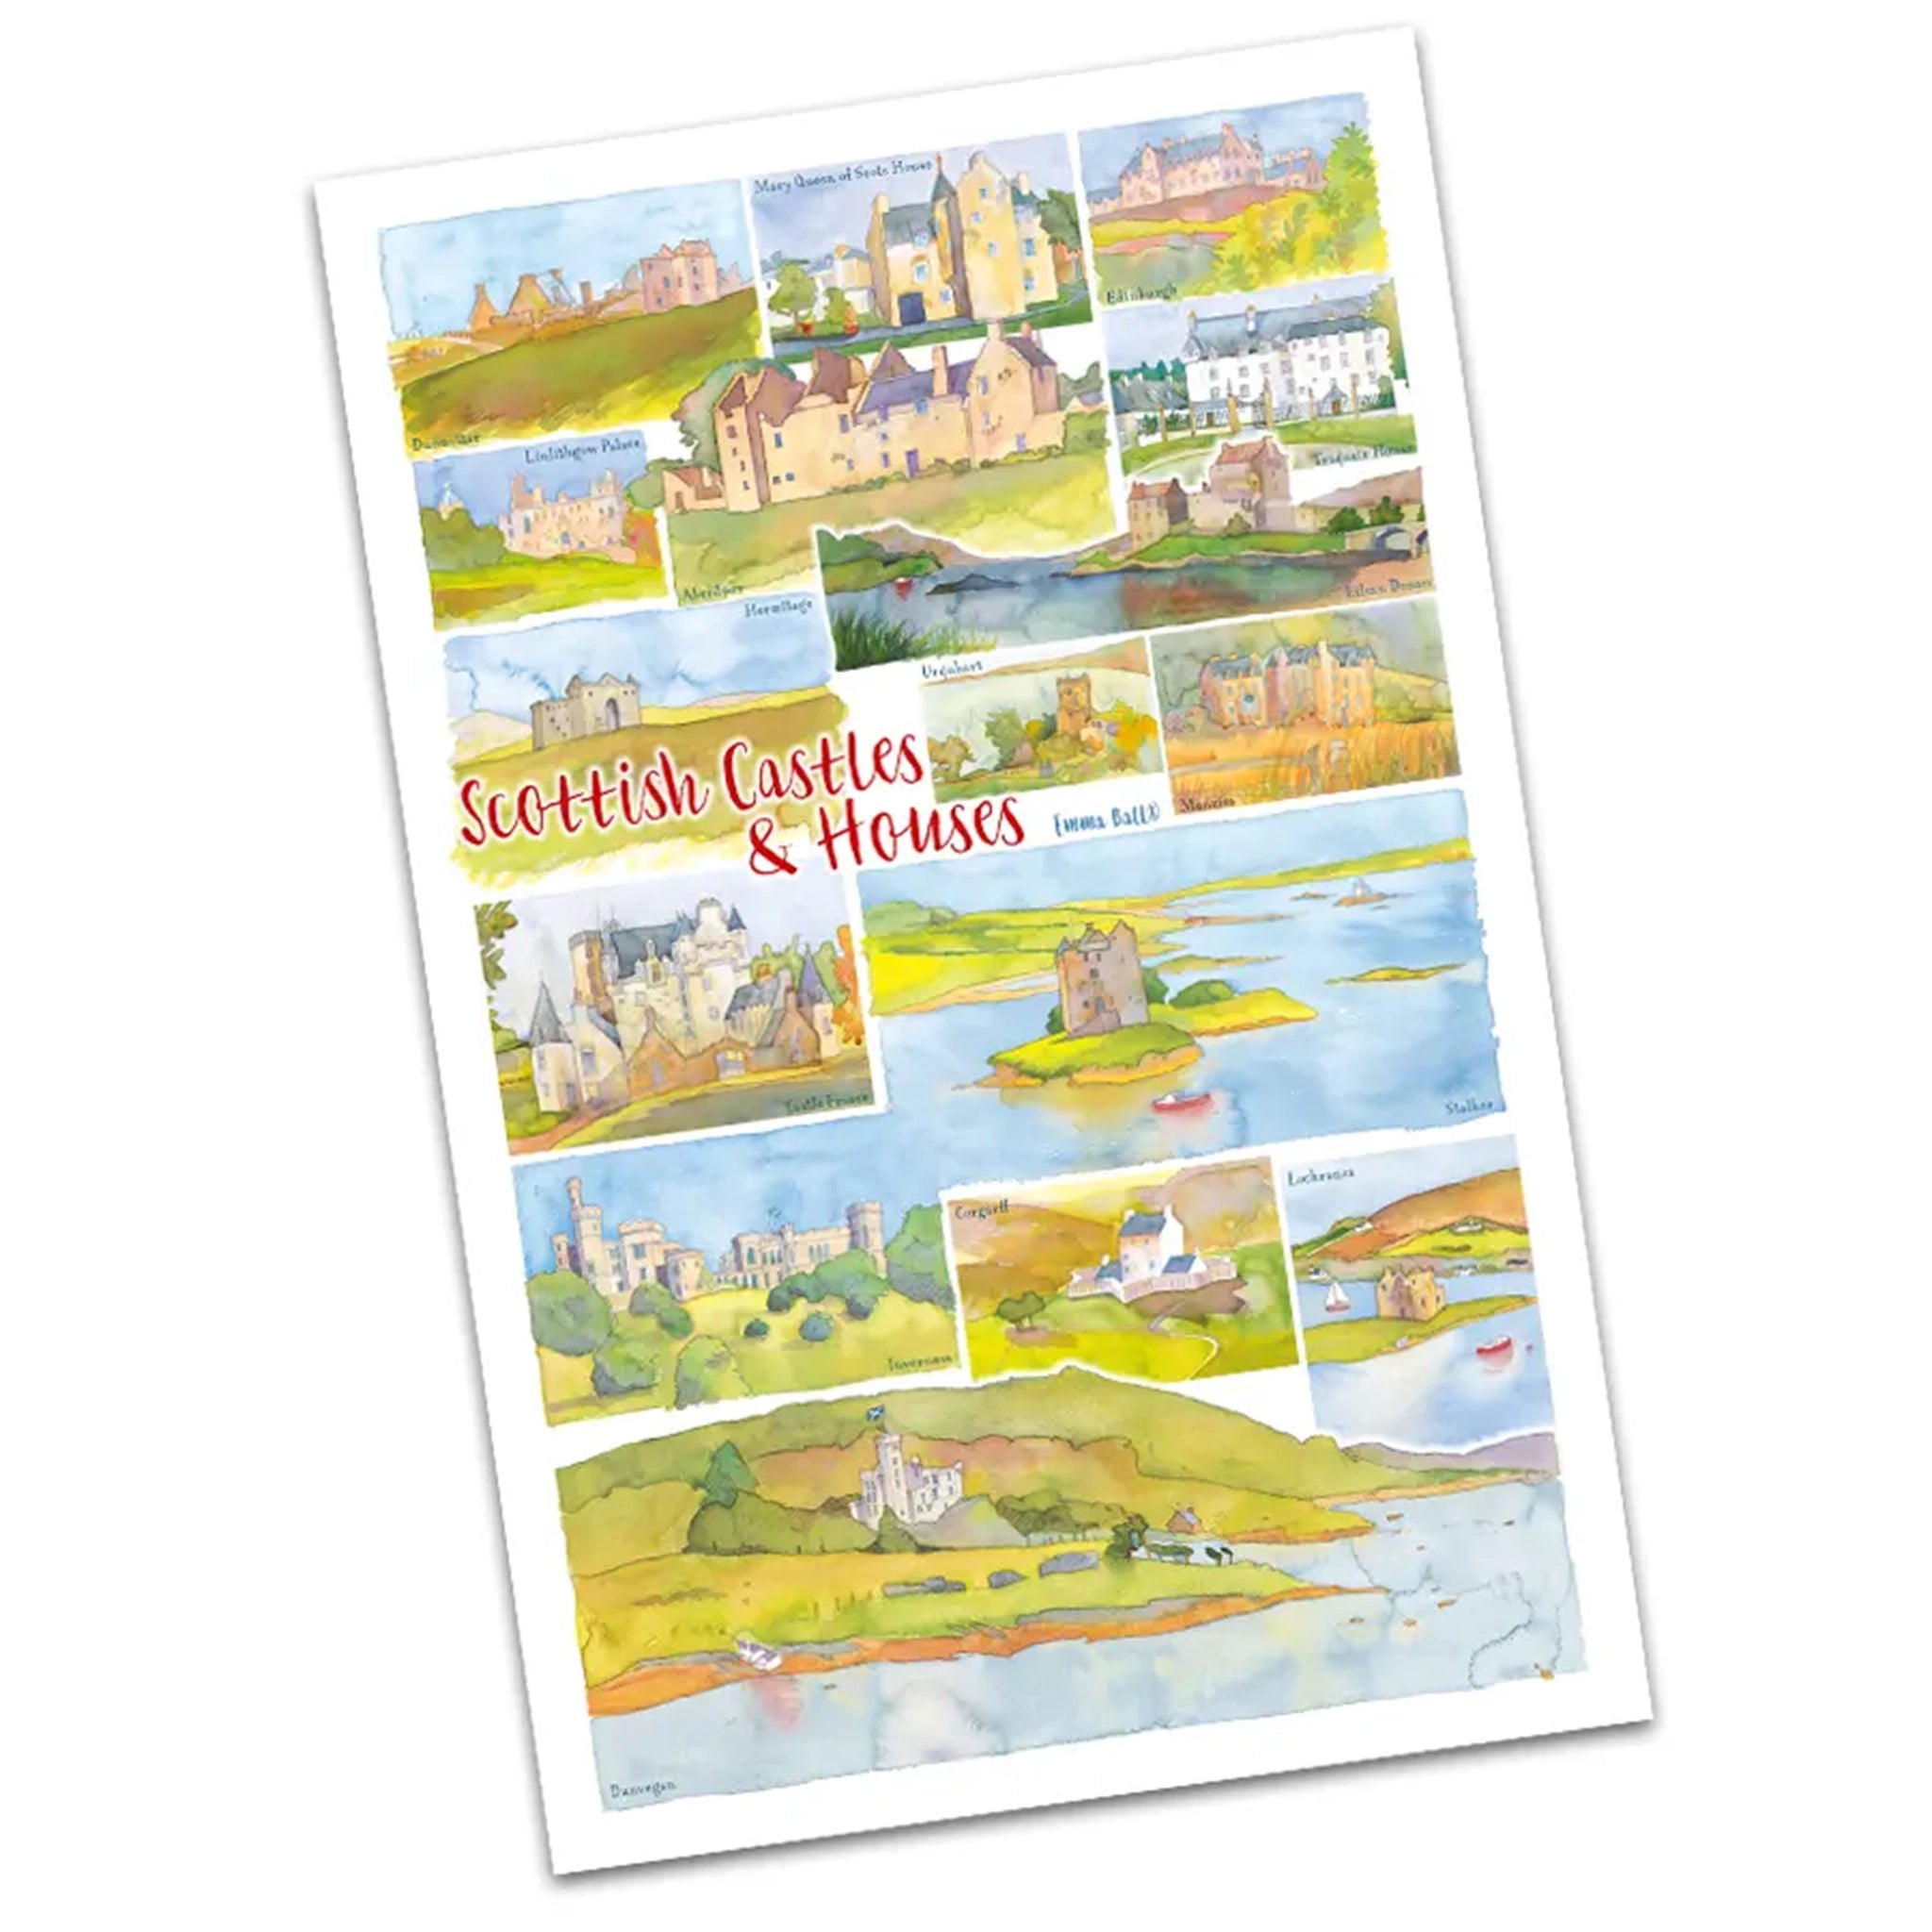 A white tea towel with watercolours of Scottish Castles and Houses